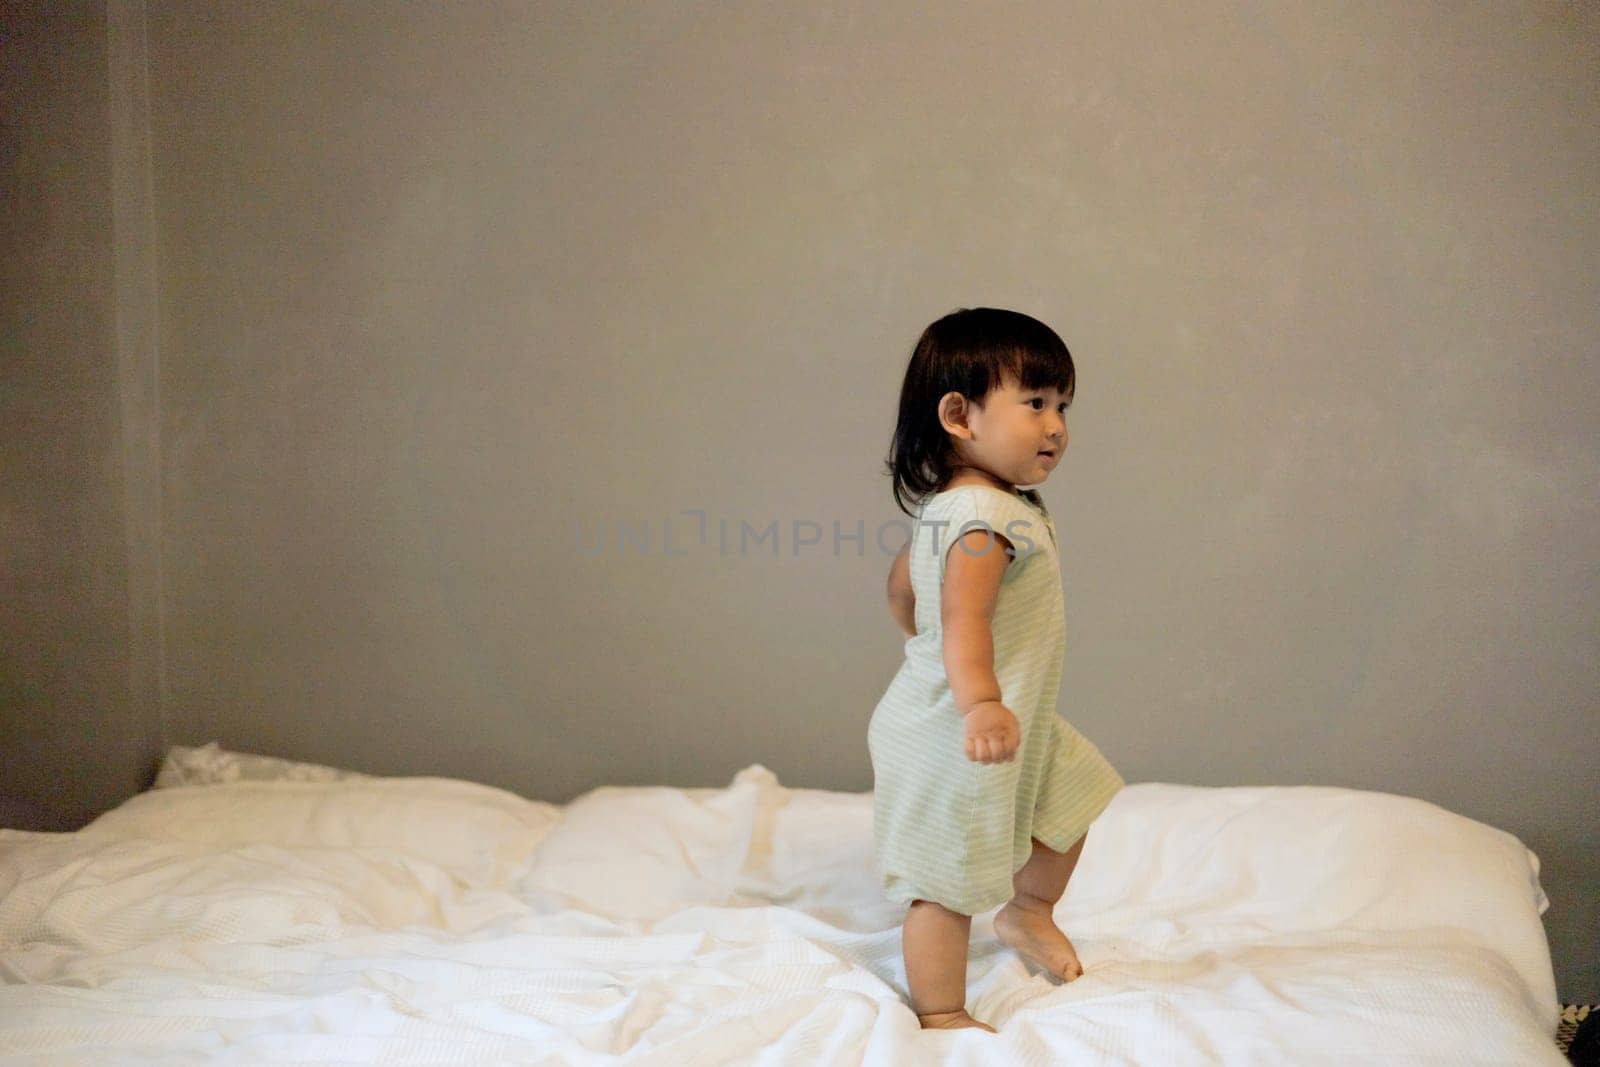 Child playing in bed in gray bedroom. Little Boy is Jumping On The Bed.